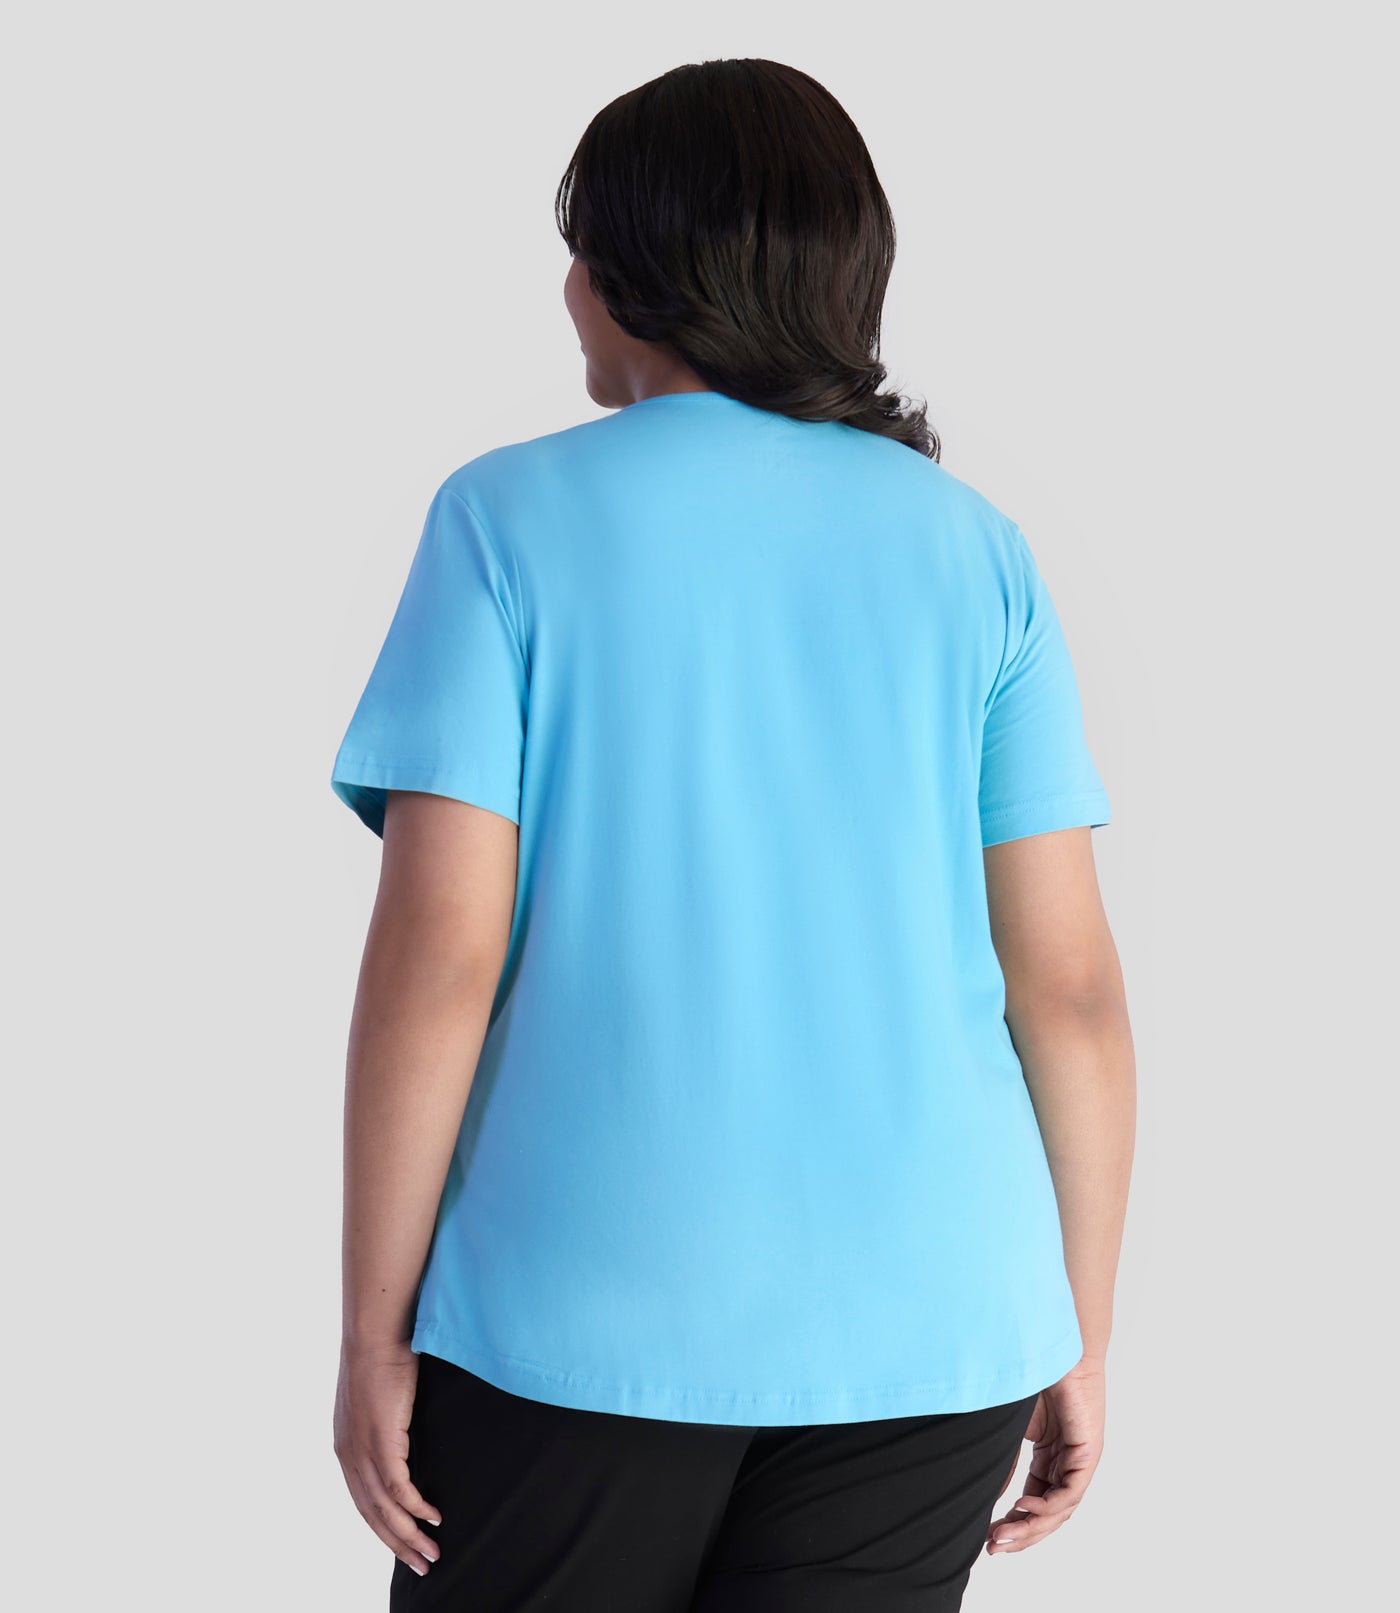 Model is facing back with her arms by her side. She is wearing JunoActive's Designer Graphic scoop neck top color mountain lake blue.